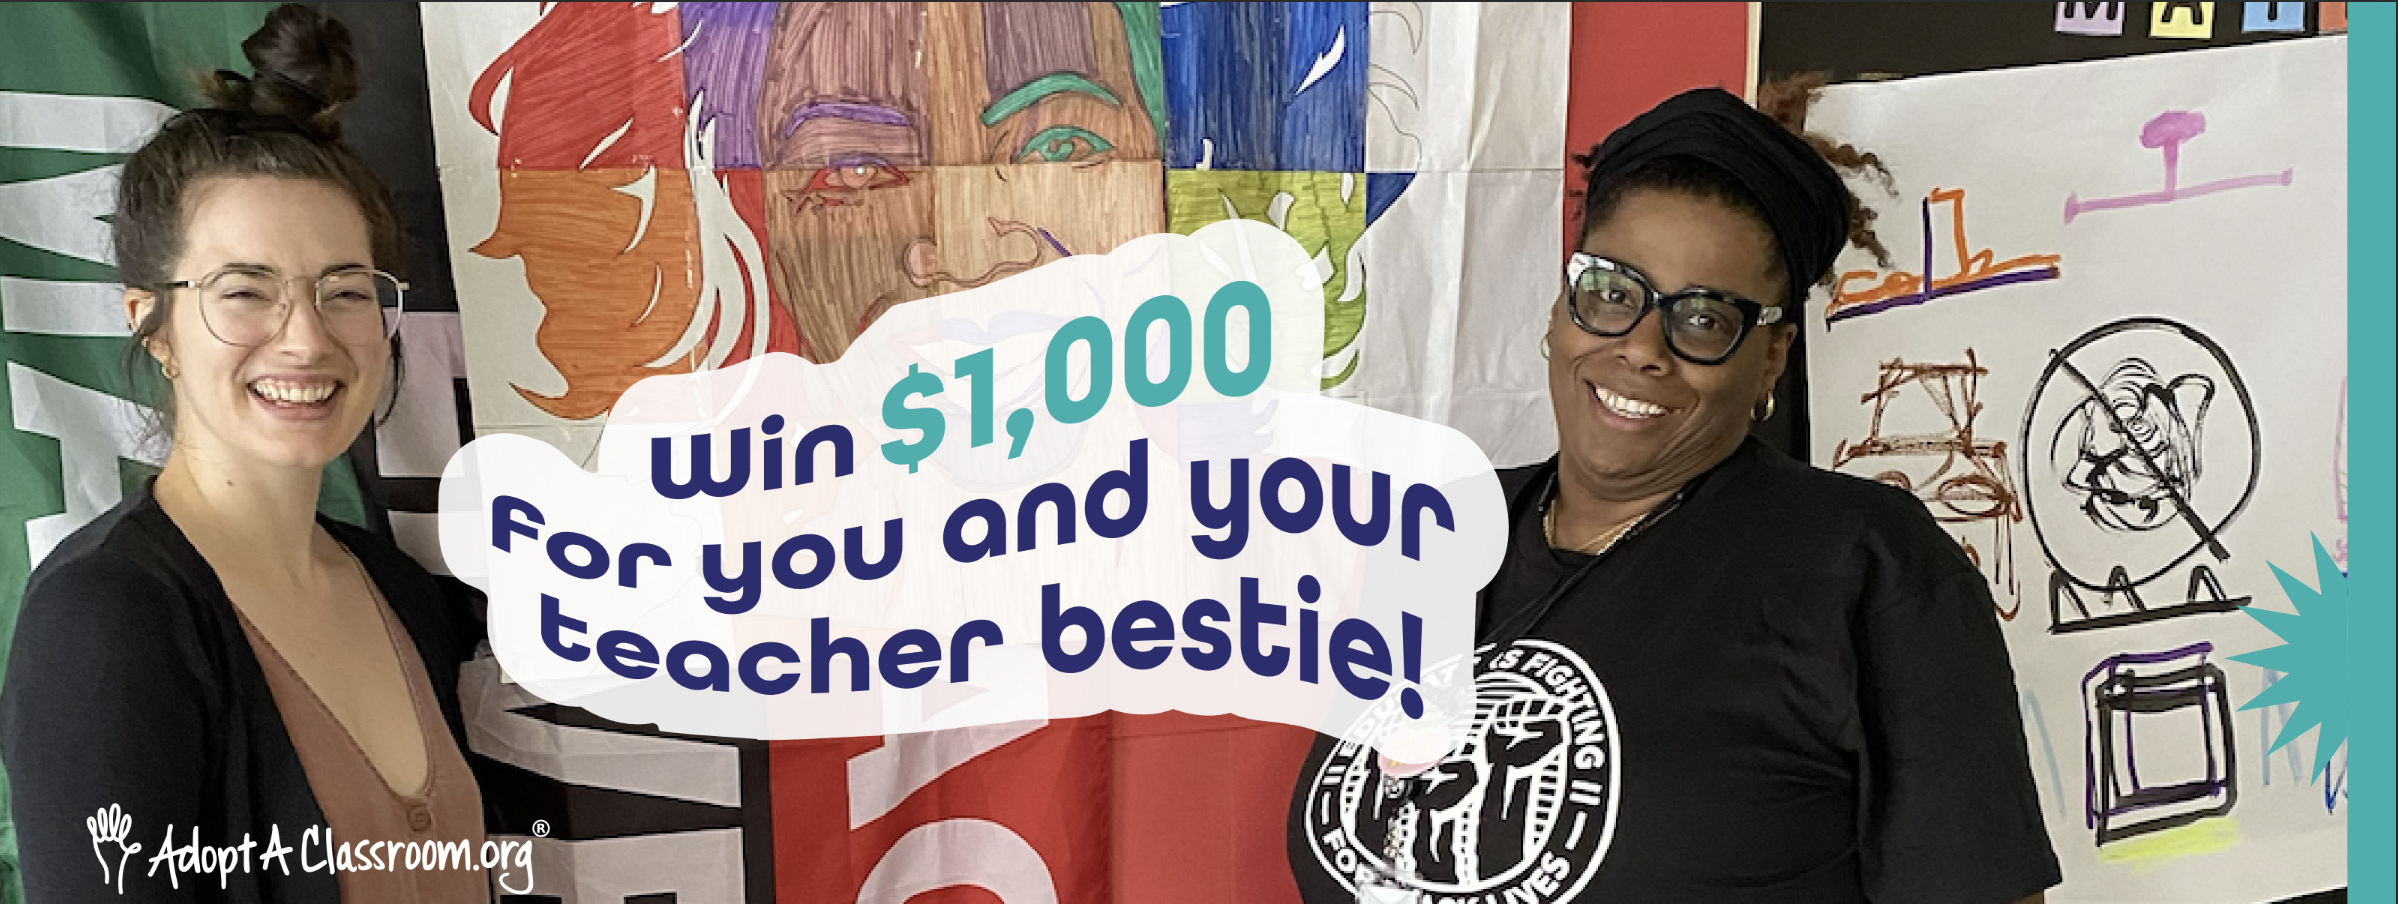 Two teachers smile in a classroom. Text reads Win $1,000 for you and your teacher bestie!